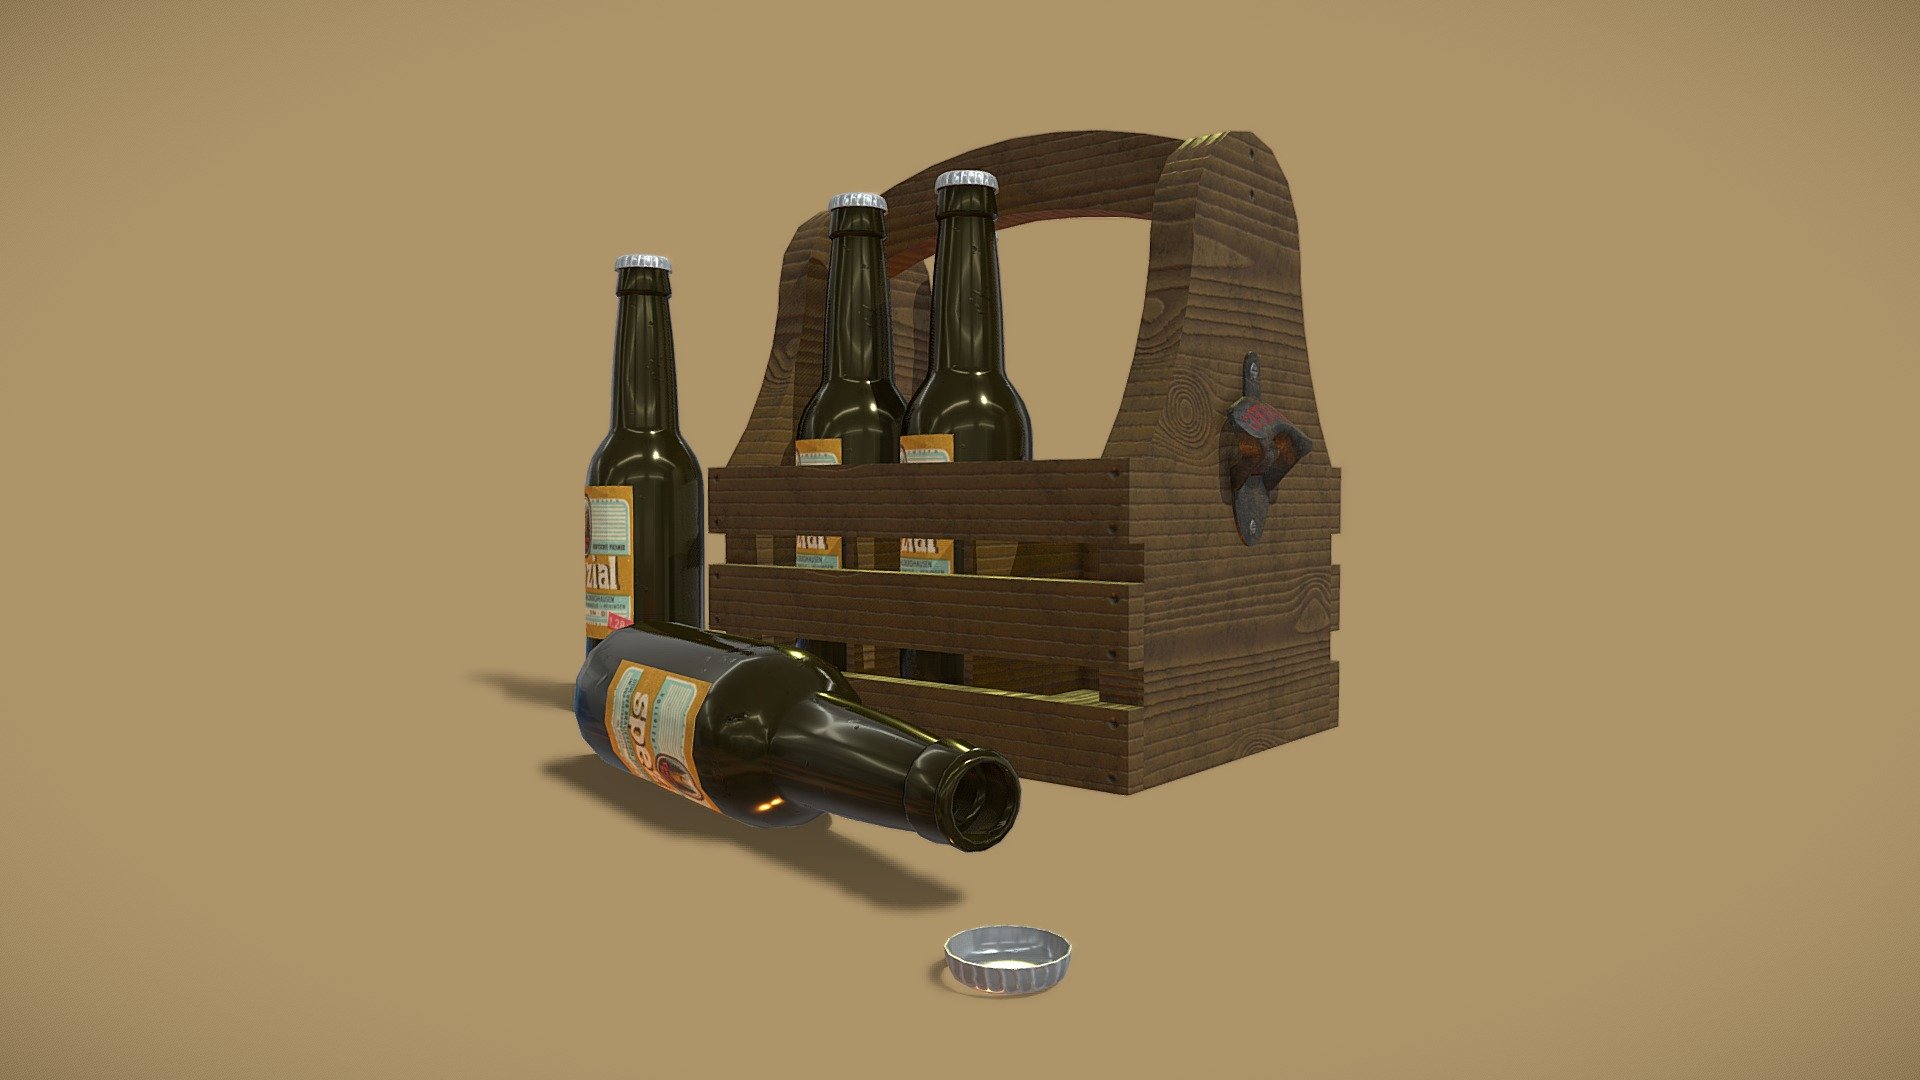 Low poly model.
Textured using Substance Painter.
Modelled accurately to scale from existing products.
Ready for use in a game/animation scene.
Bottle and caps are seperate object and can be removed from the carrier.

My Portfolio - Wooden Beer Carrier - Download Free 3D model by Daz (@Darren.Hogan) 3d model